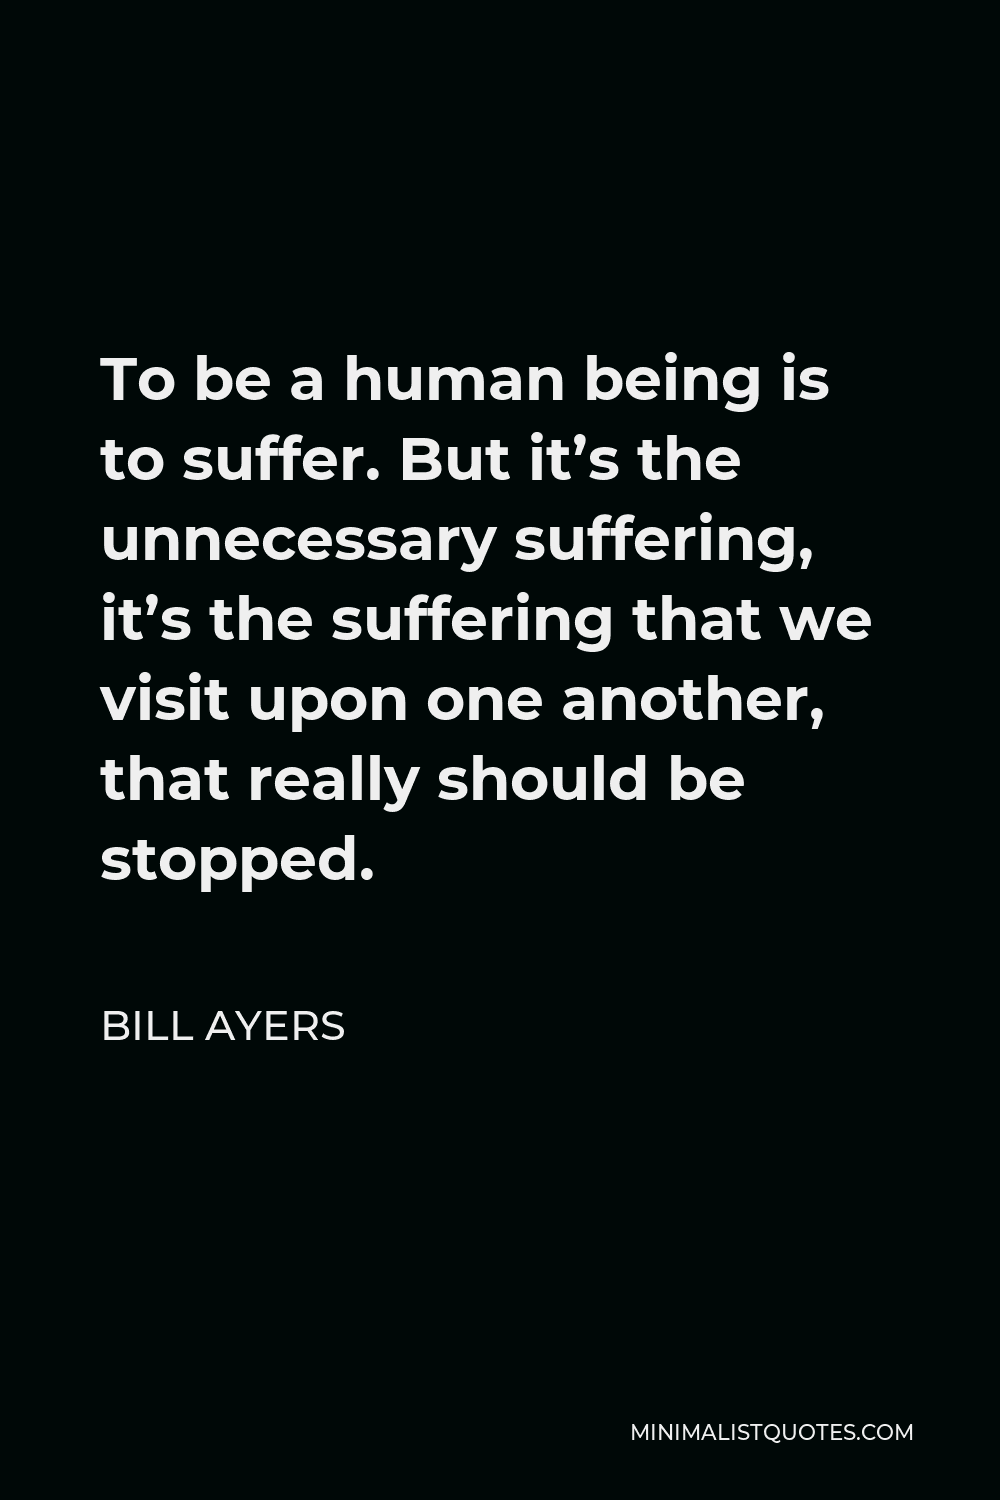 Bill Ayers Quote - To be a human being is to suffer. But it’s the unnecessary suffering, it’s the suffering that we visit upon one another, that really should be stopped.